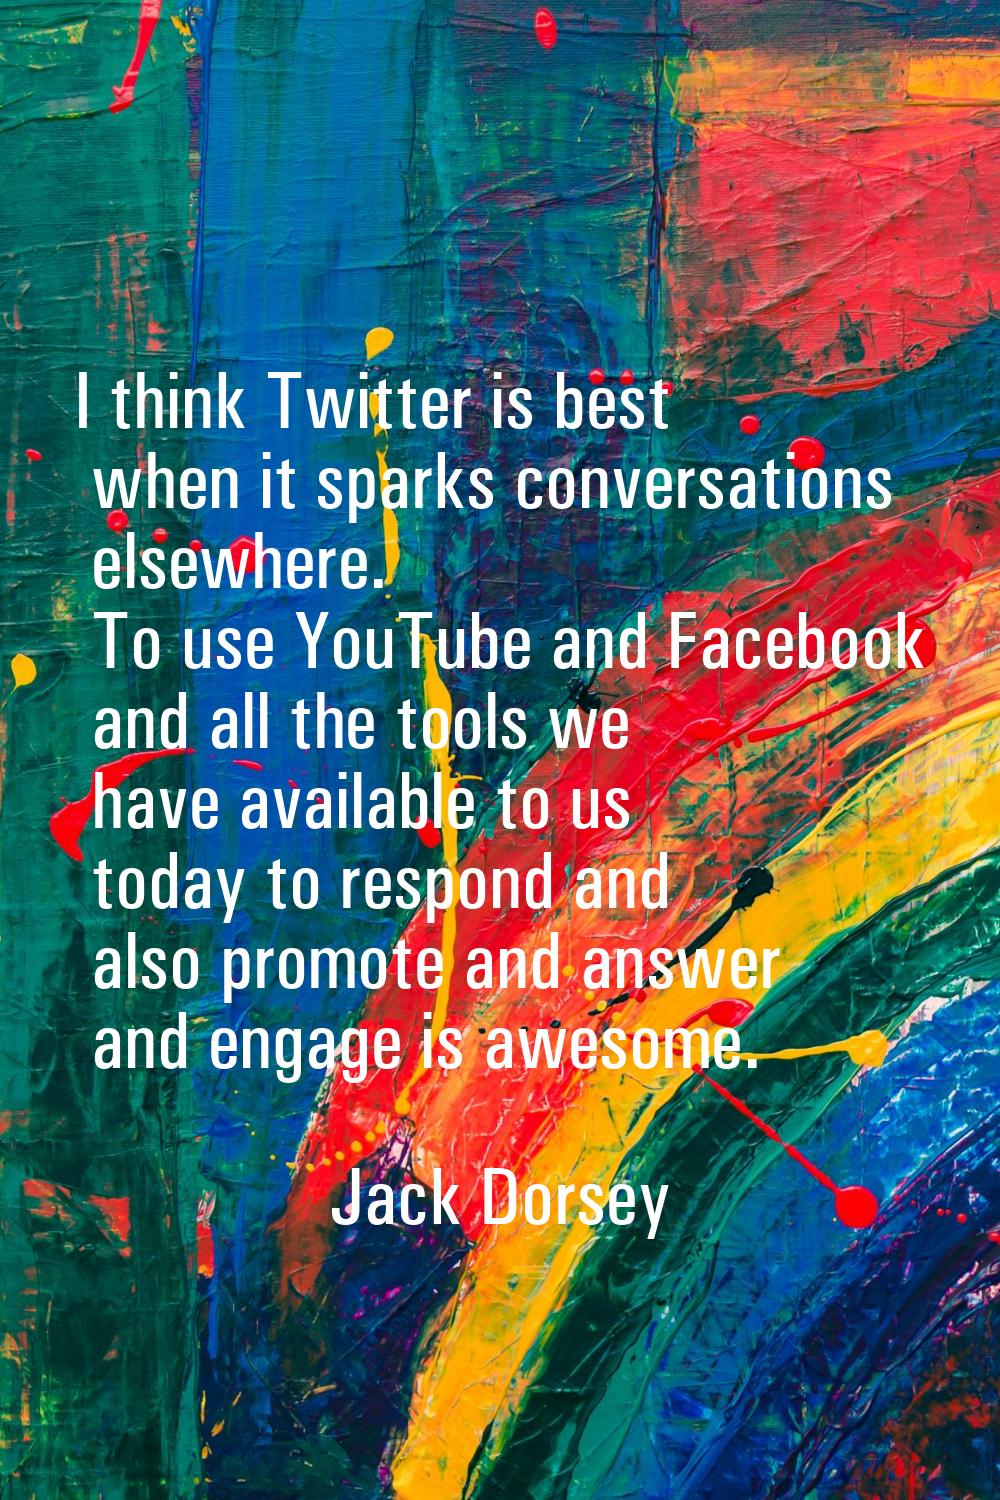 I think Twitter is best when it sparks conversations elsewhere. To use YouTube and Facebook and all